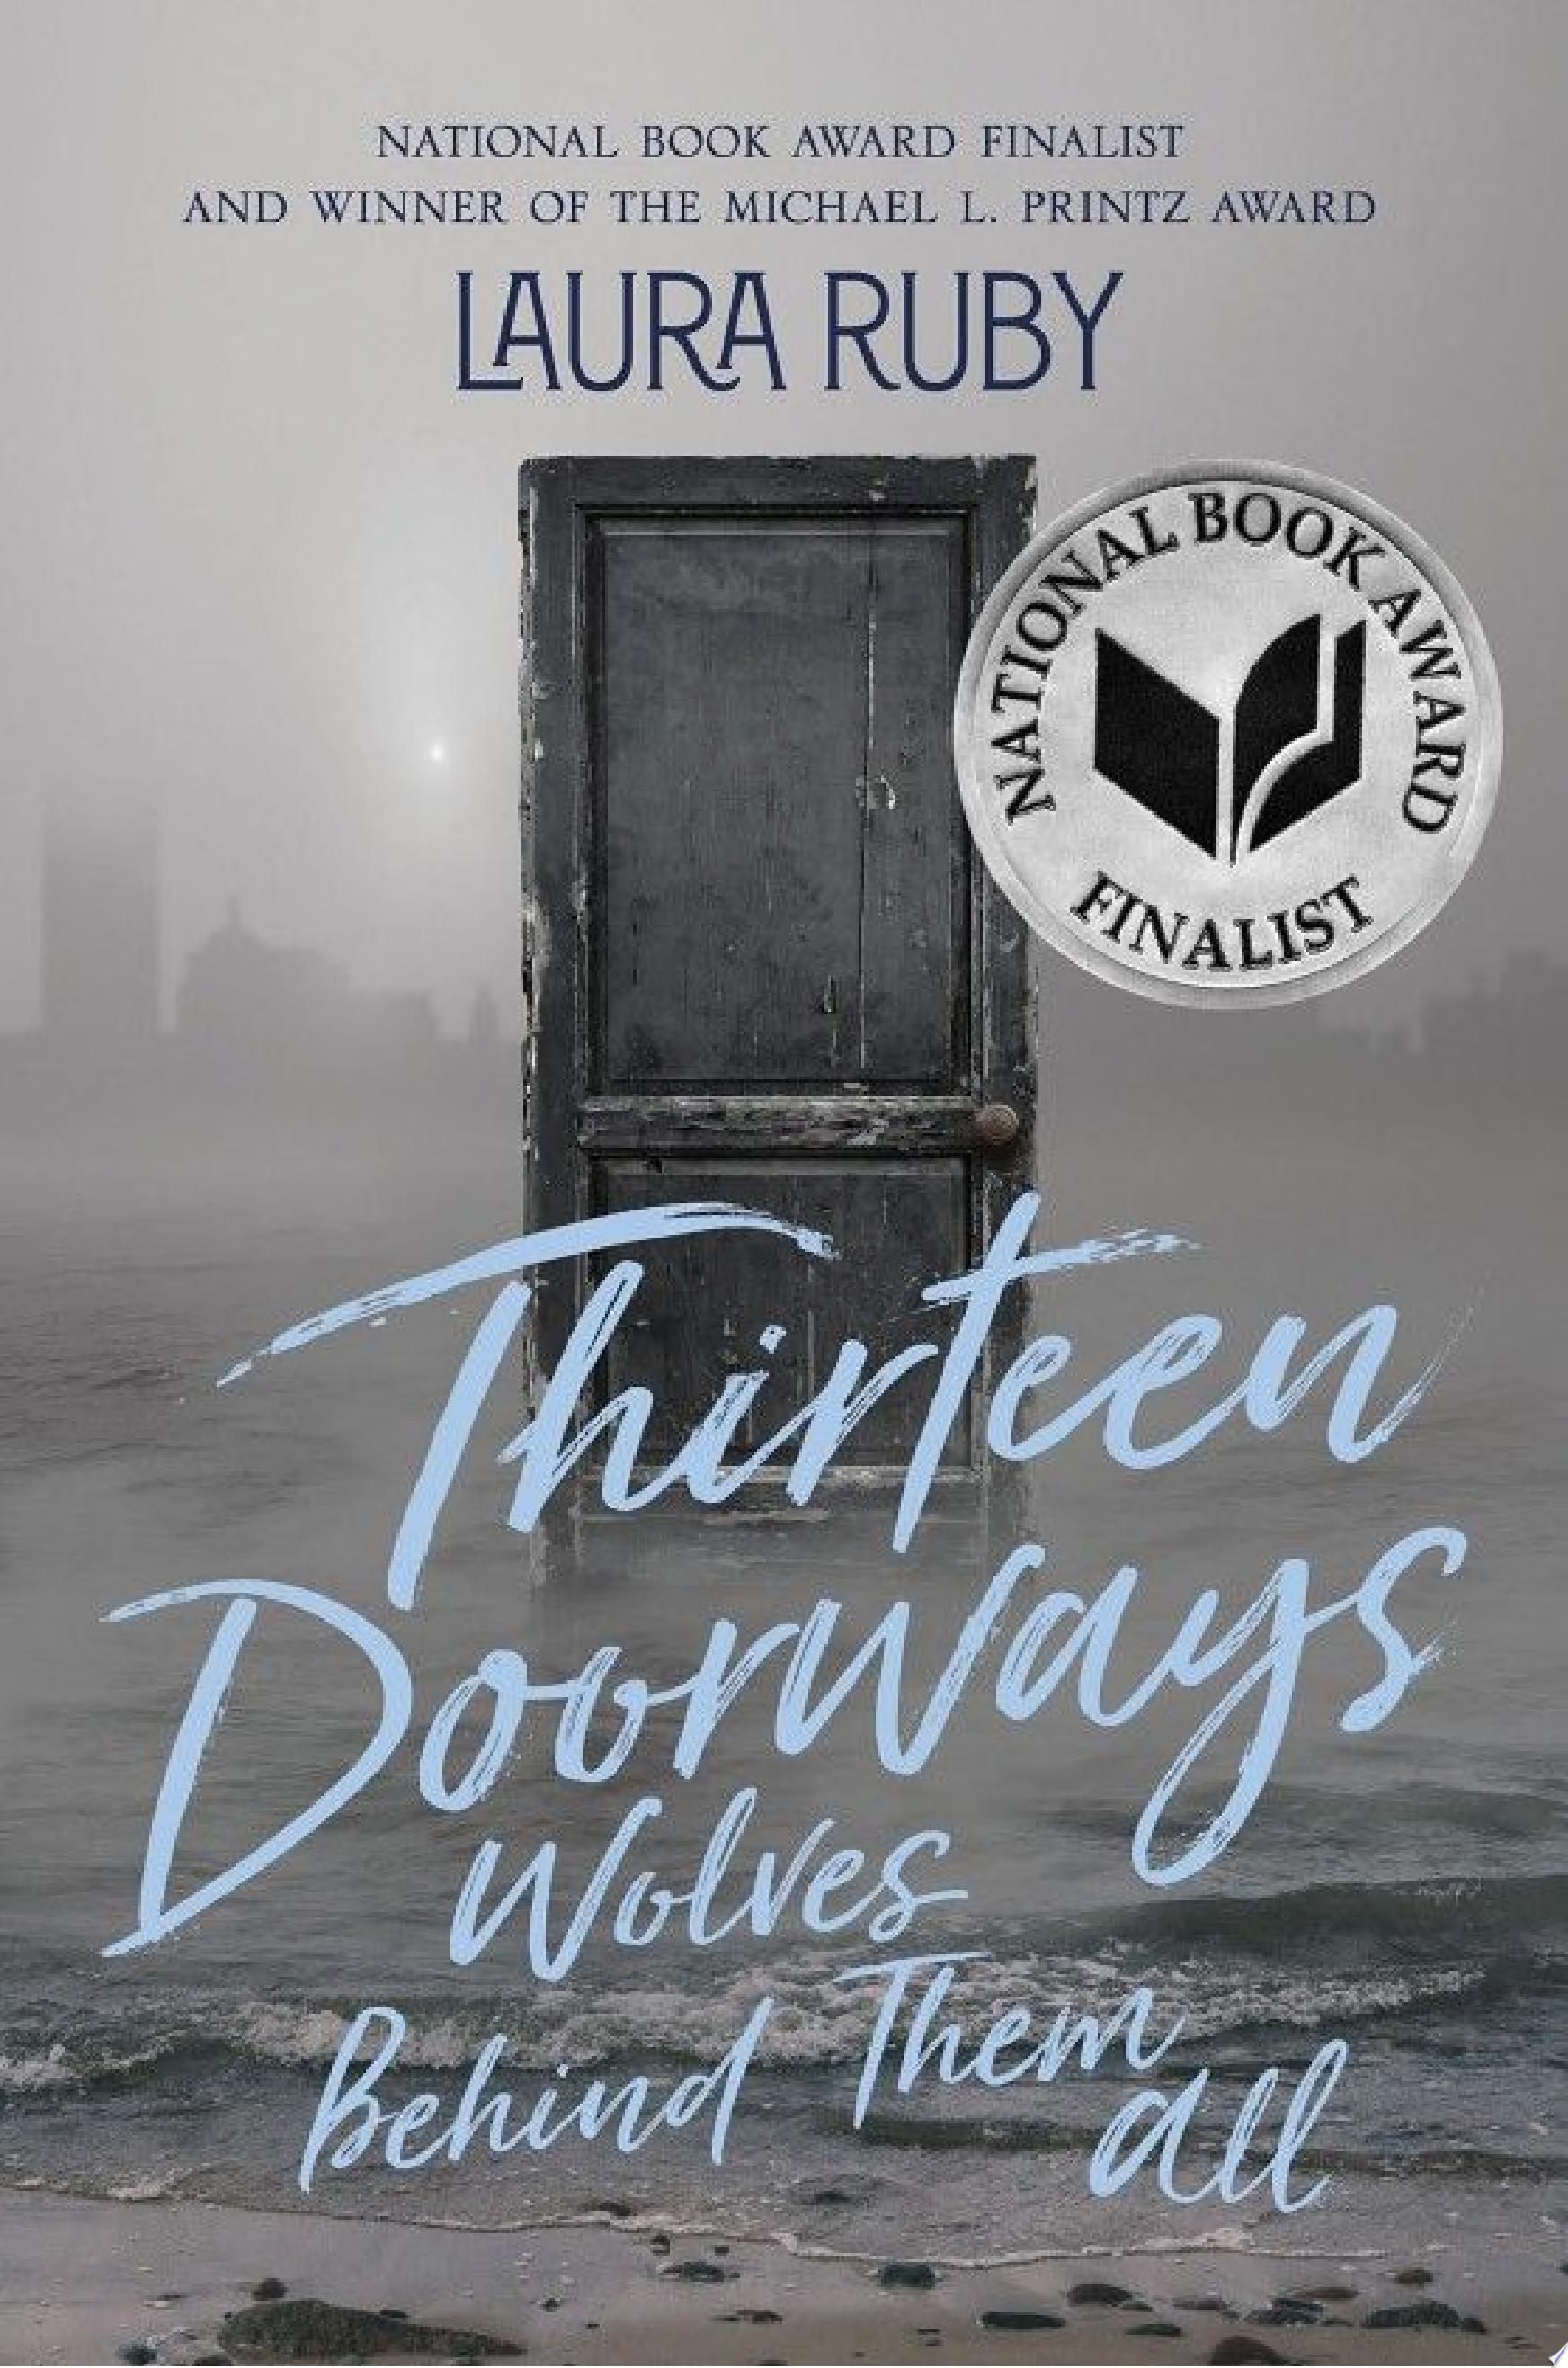 Image for "Thirteen Doorways, Wolves Behind Them All"